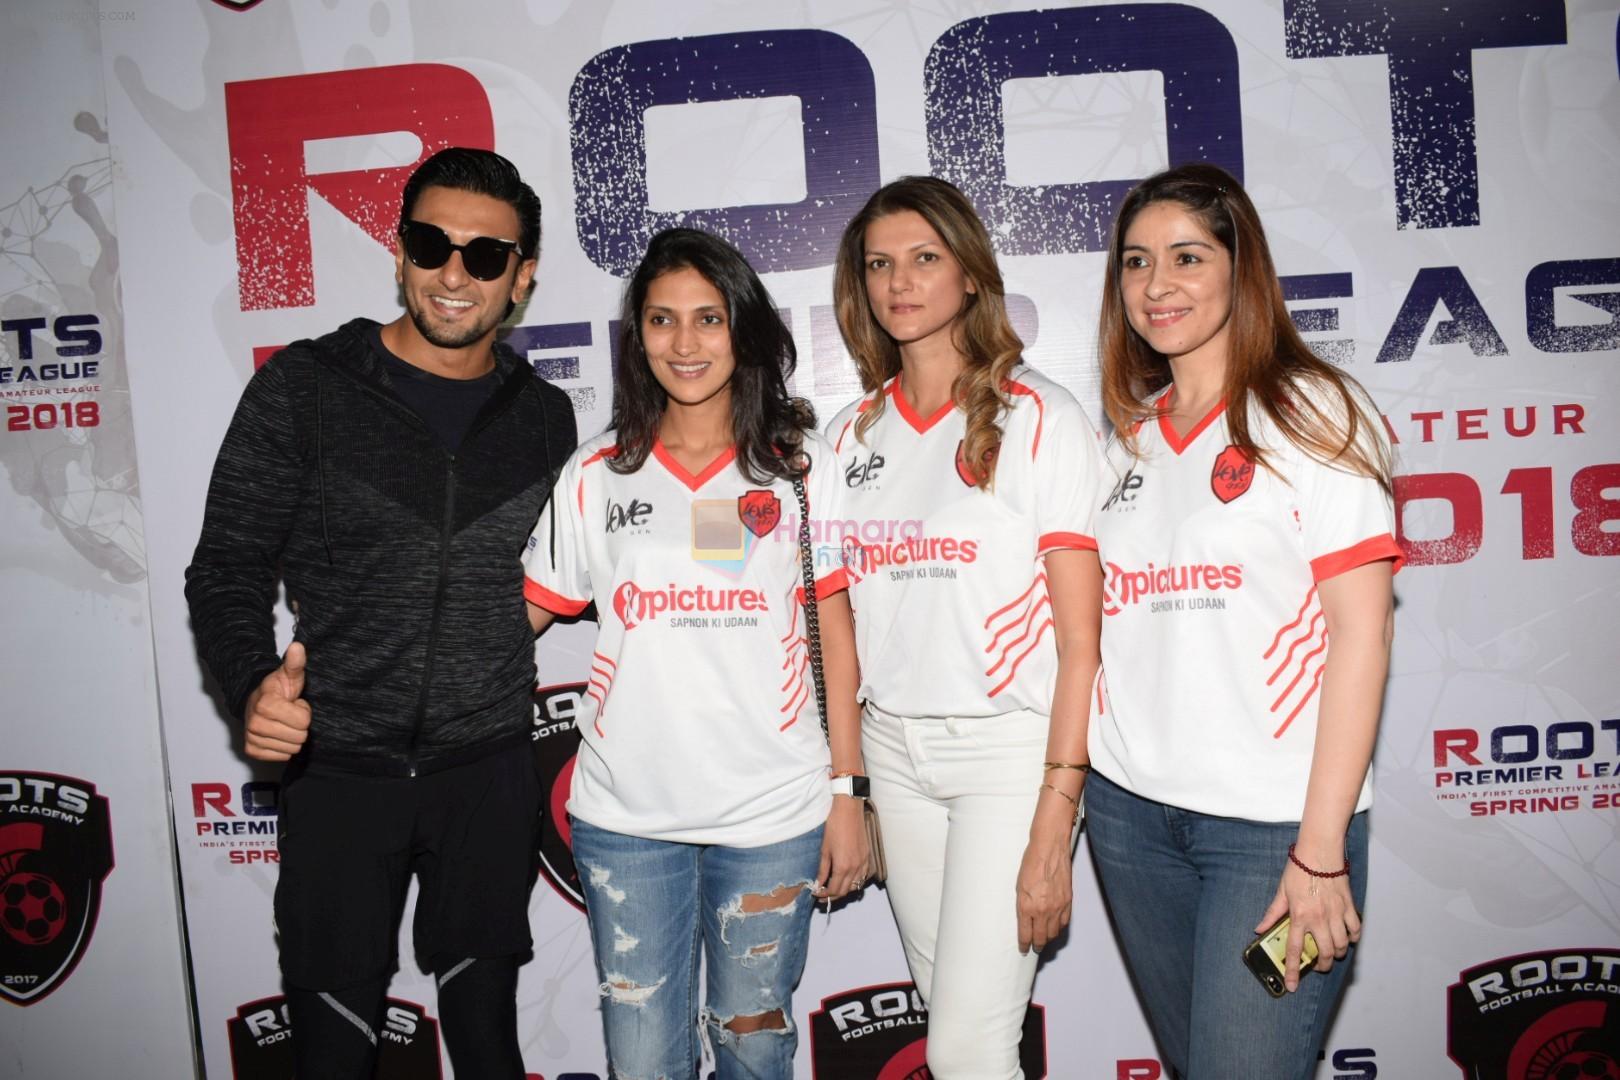 Ranveer Singh, Nandita Mahtani,  Bhavna Pandey  at Roots Premiere League Spring Season 2018 For Amateur Football In India on 14th March 2018